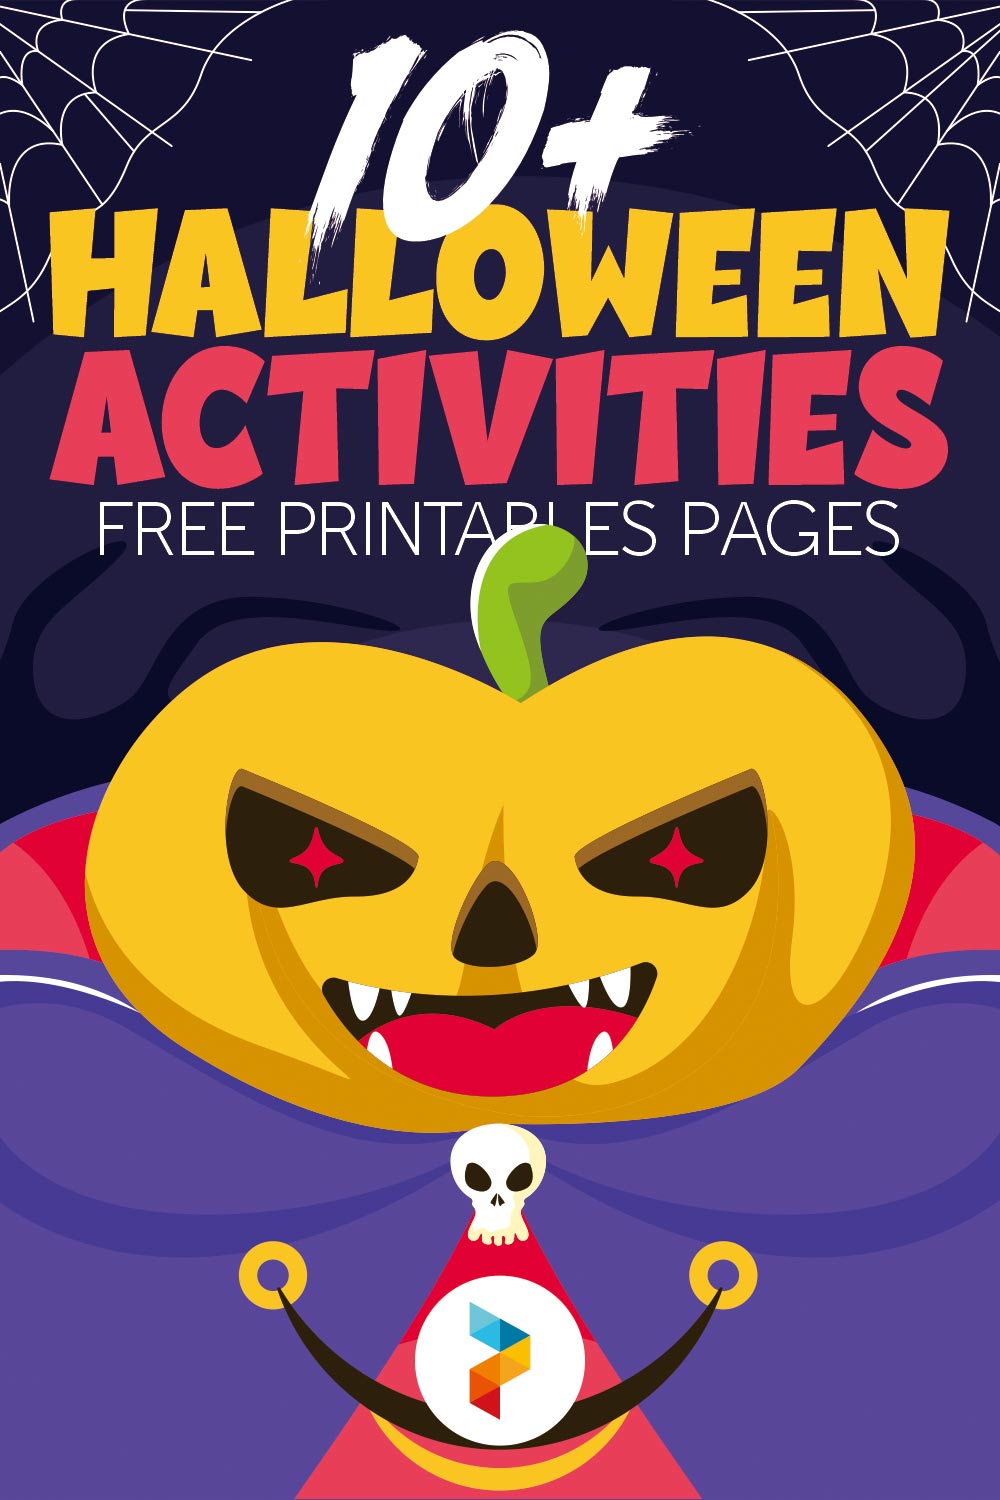 Halloween Activities Printables Pages